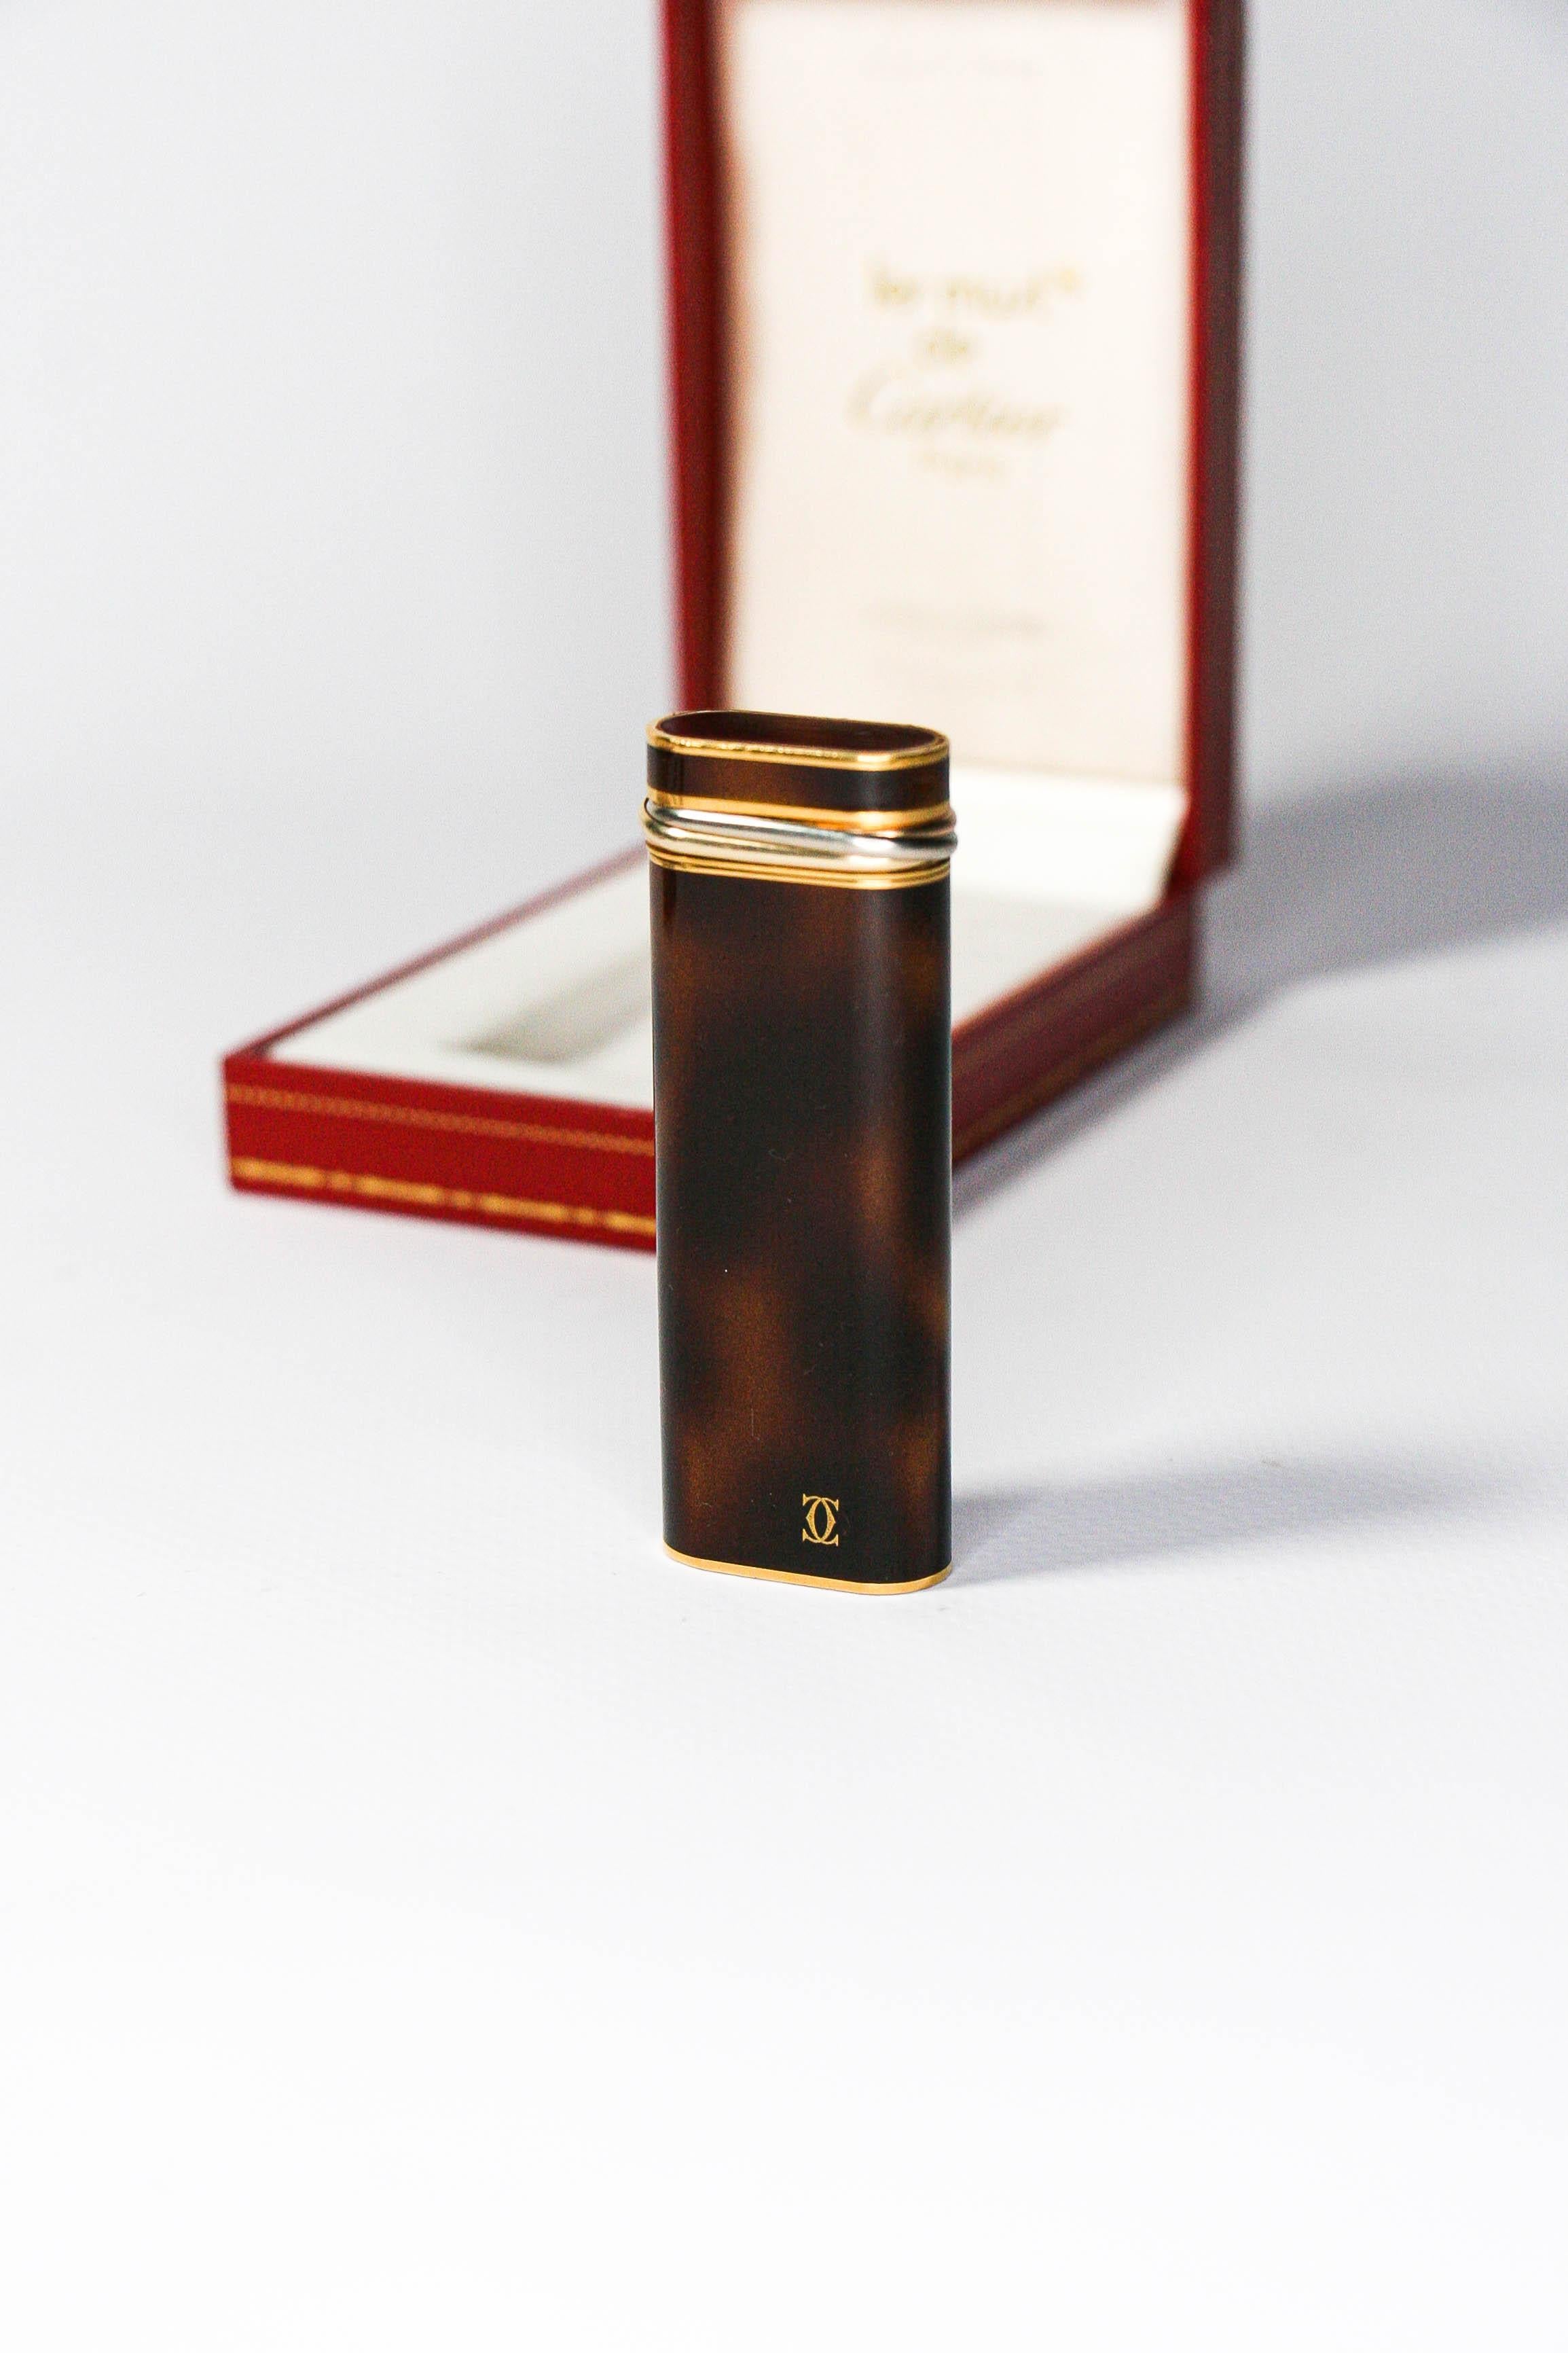 Vintage Tortoiseshell Gold Plated Cartier Les Must Trinity lighter

This gold-plated Tortoiseshell lacquered Cartier Les must lighter is indeed eye candy. Fully functional, sparks excellent, and lights every time. The lighter is in absolutely